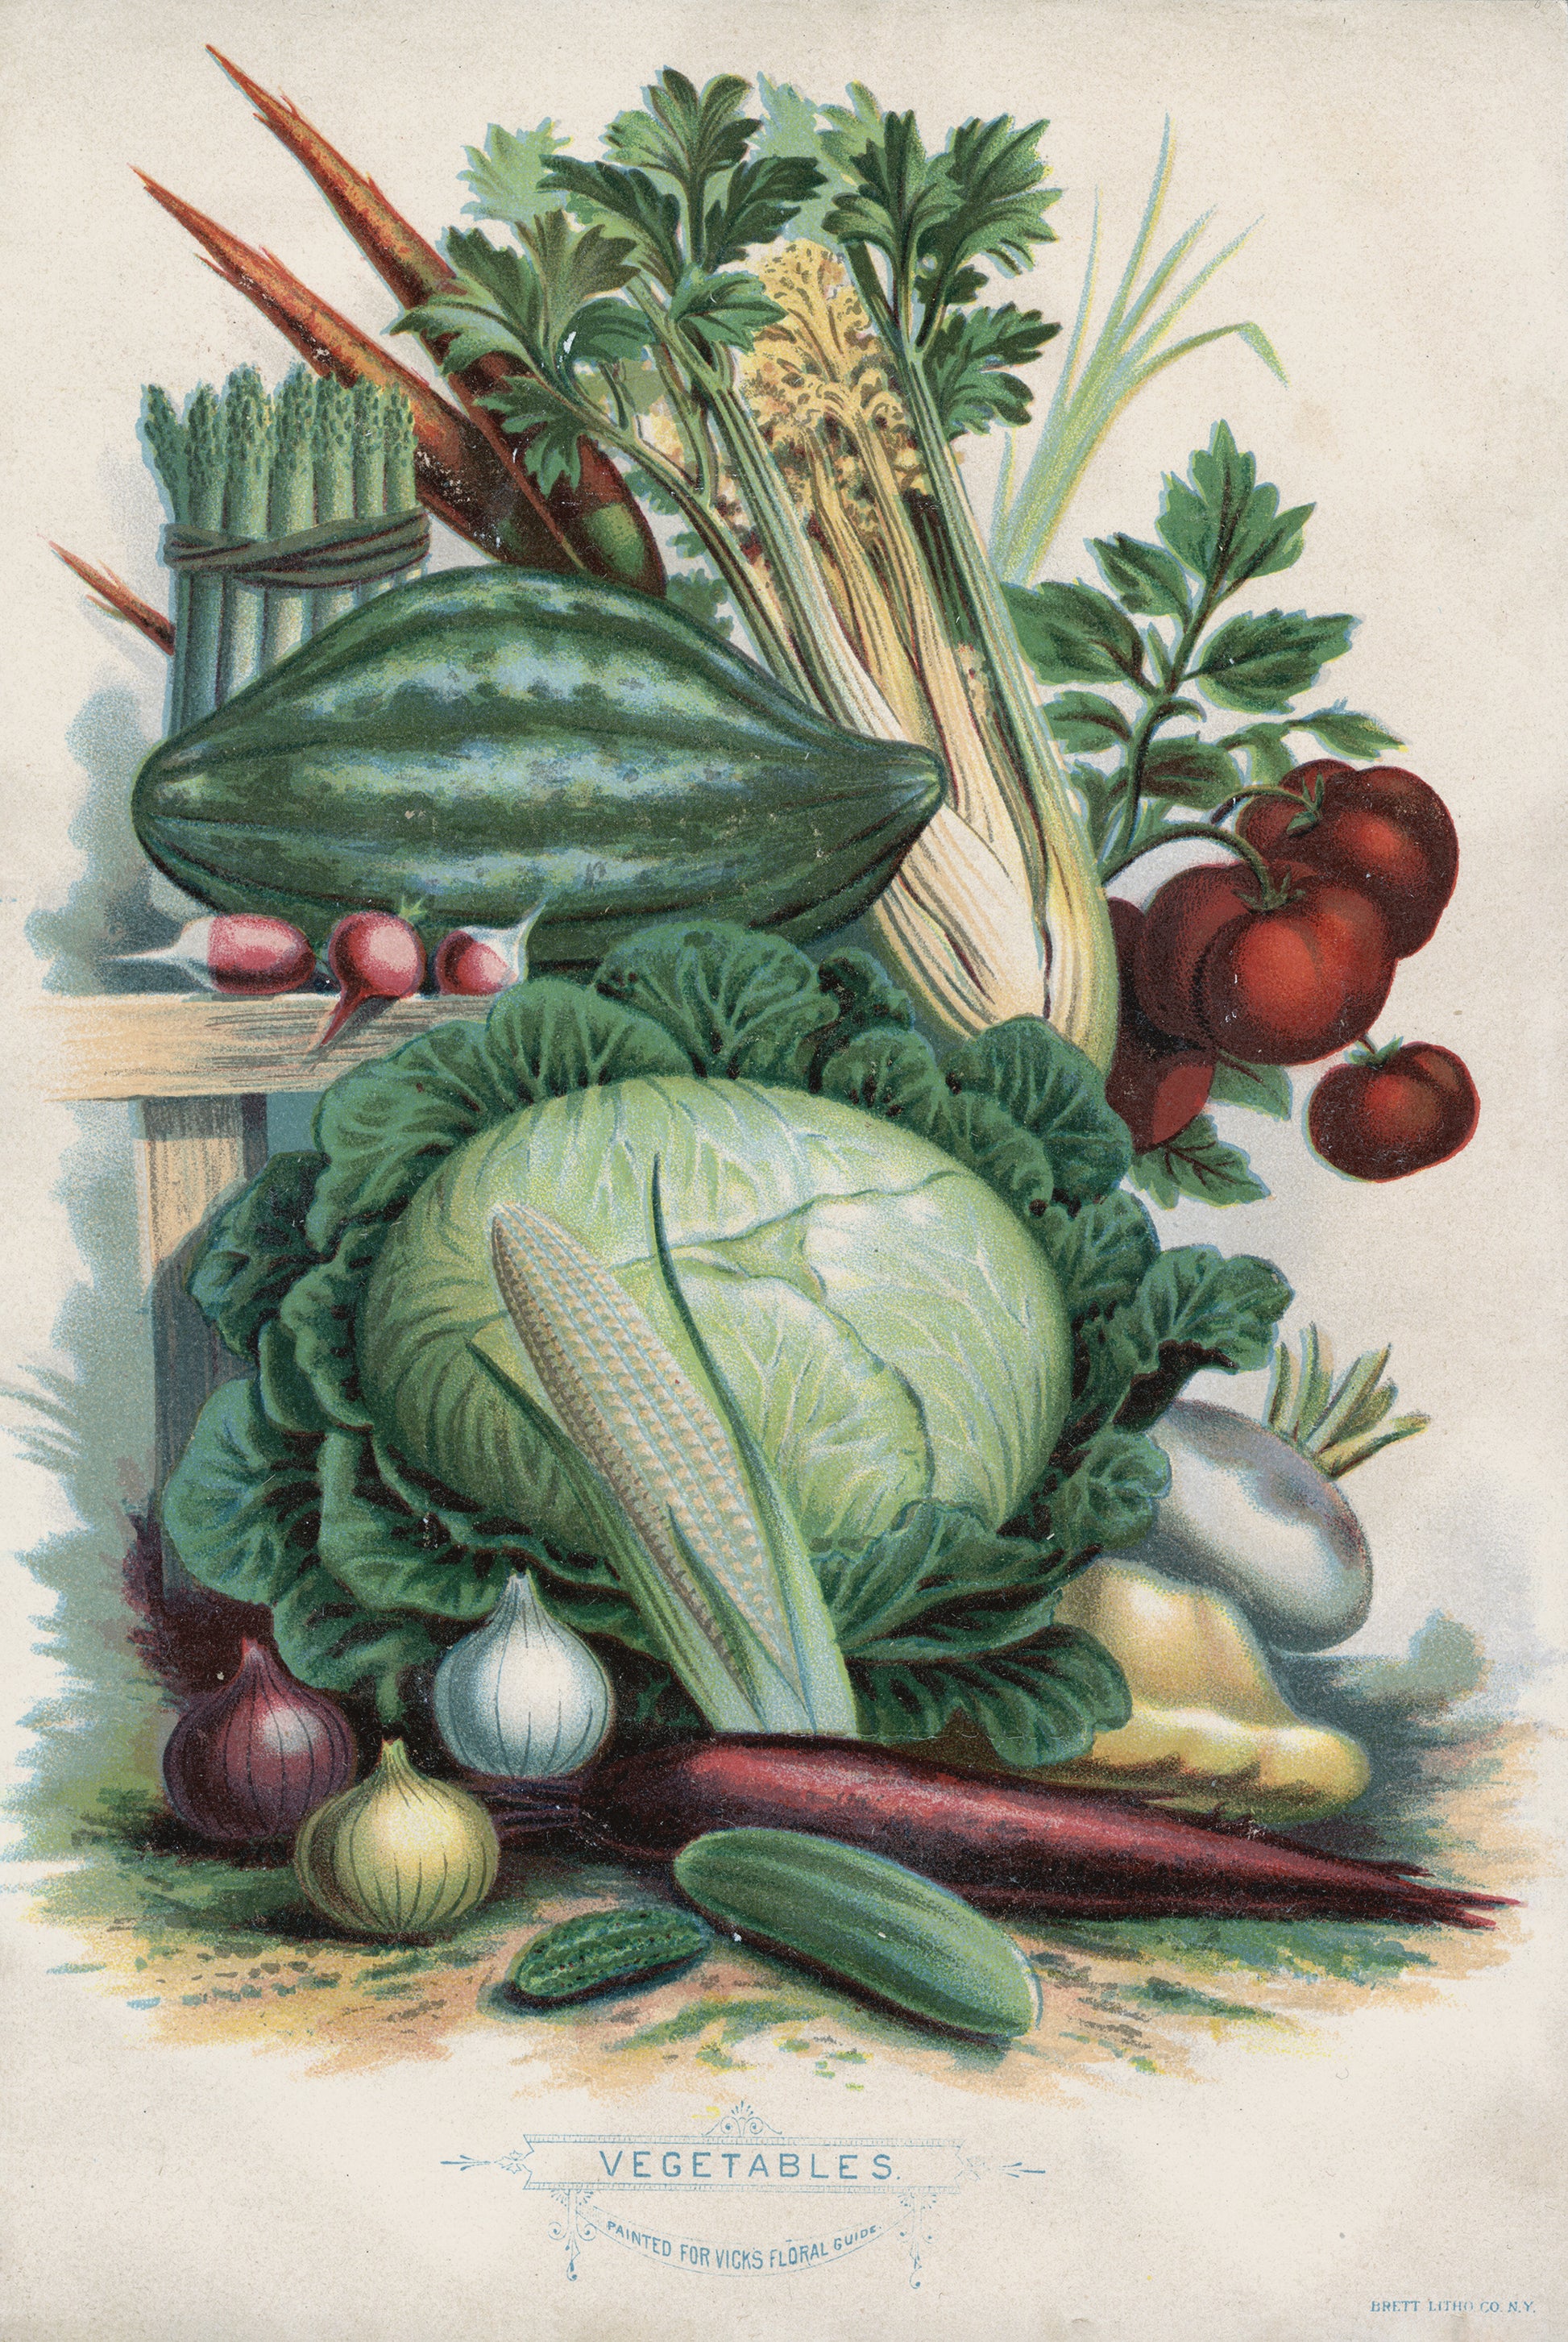 Vegetables - Print - Stomping Grounds